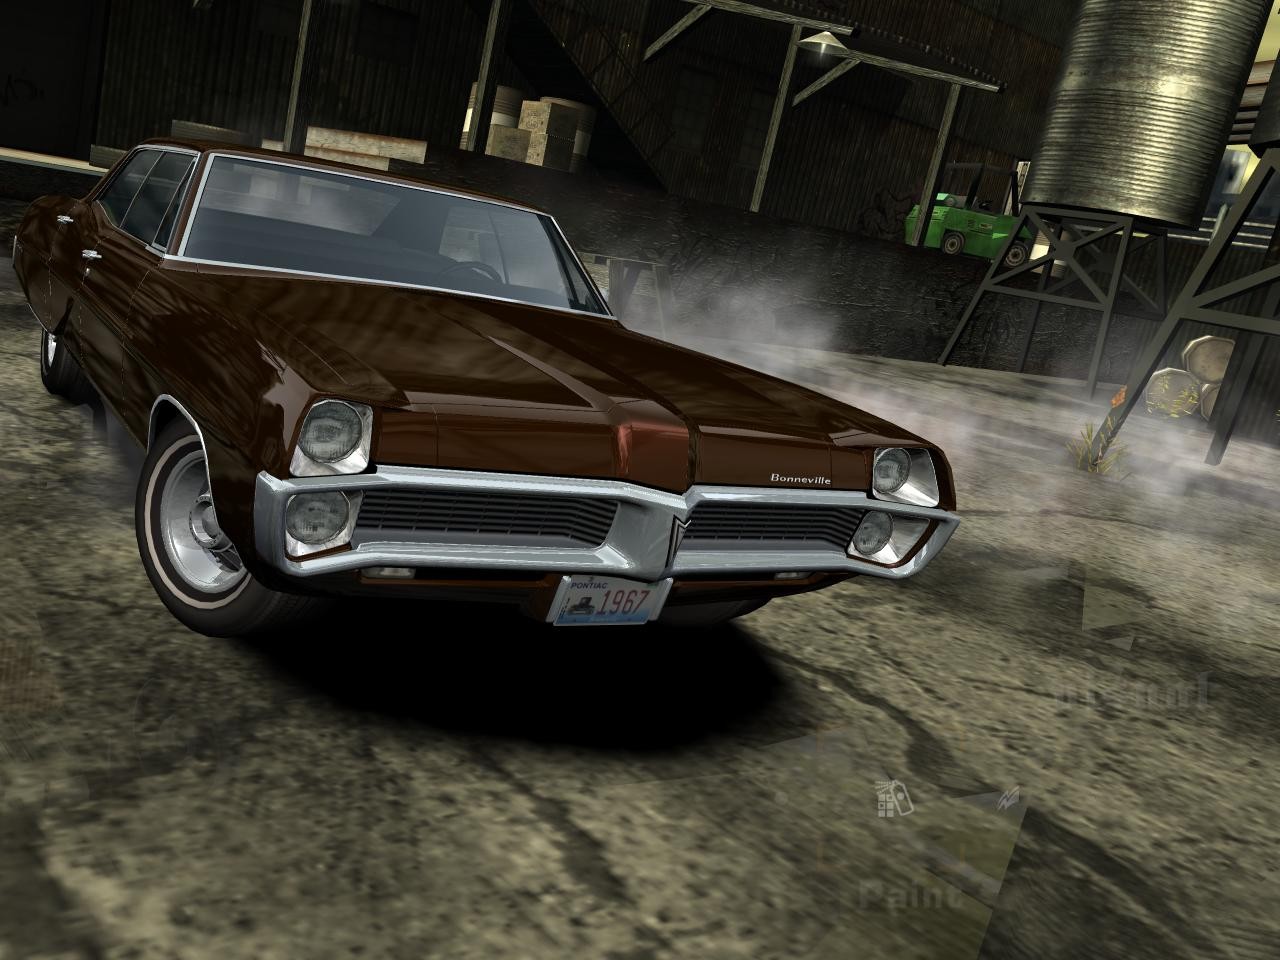 Screenshot of Pontiac Bonneville 1967 v.2 mod for Need For Speed Most Wanted